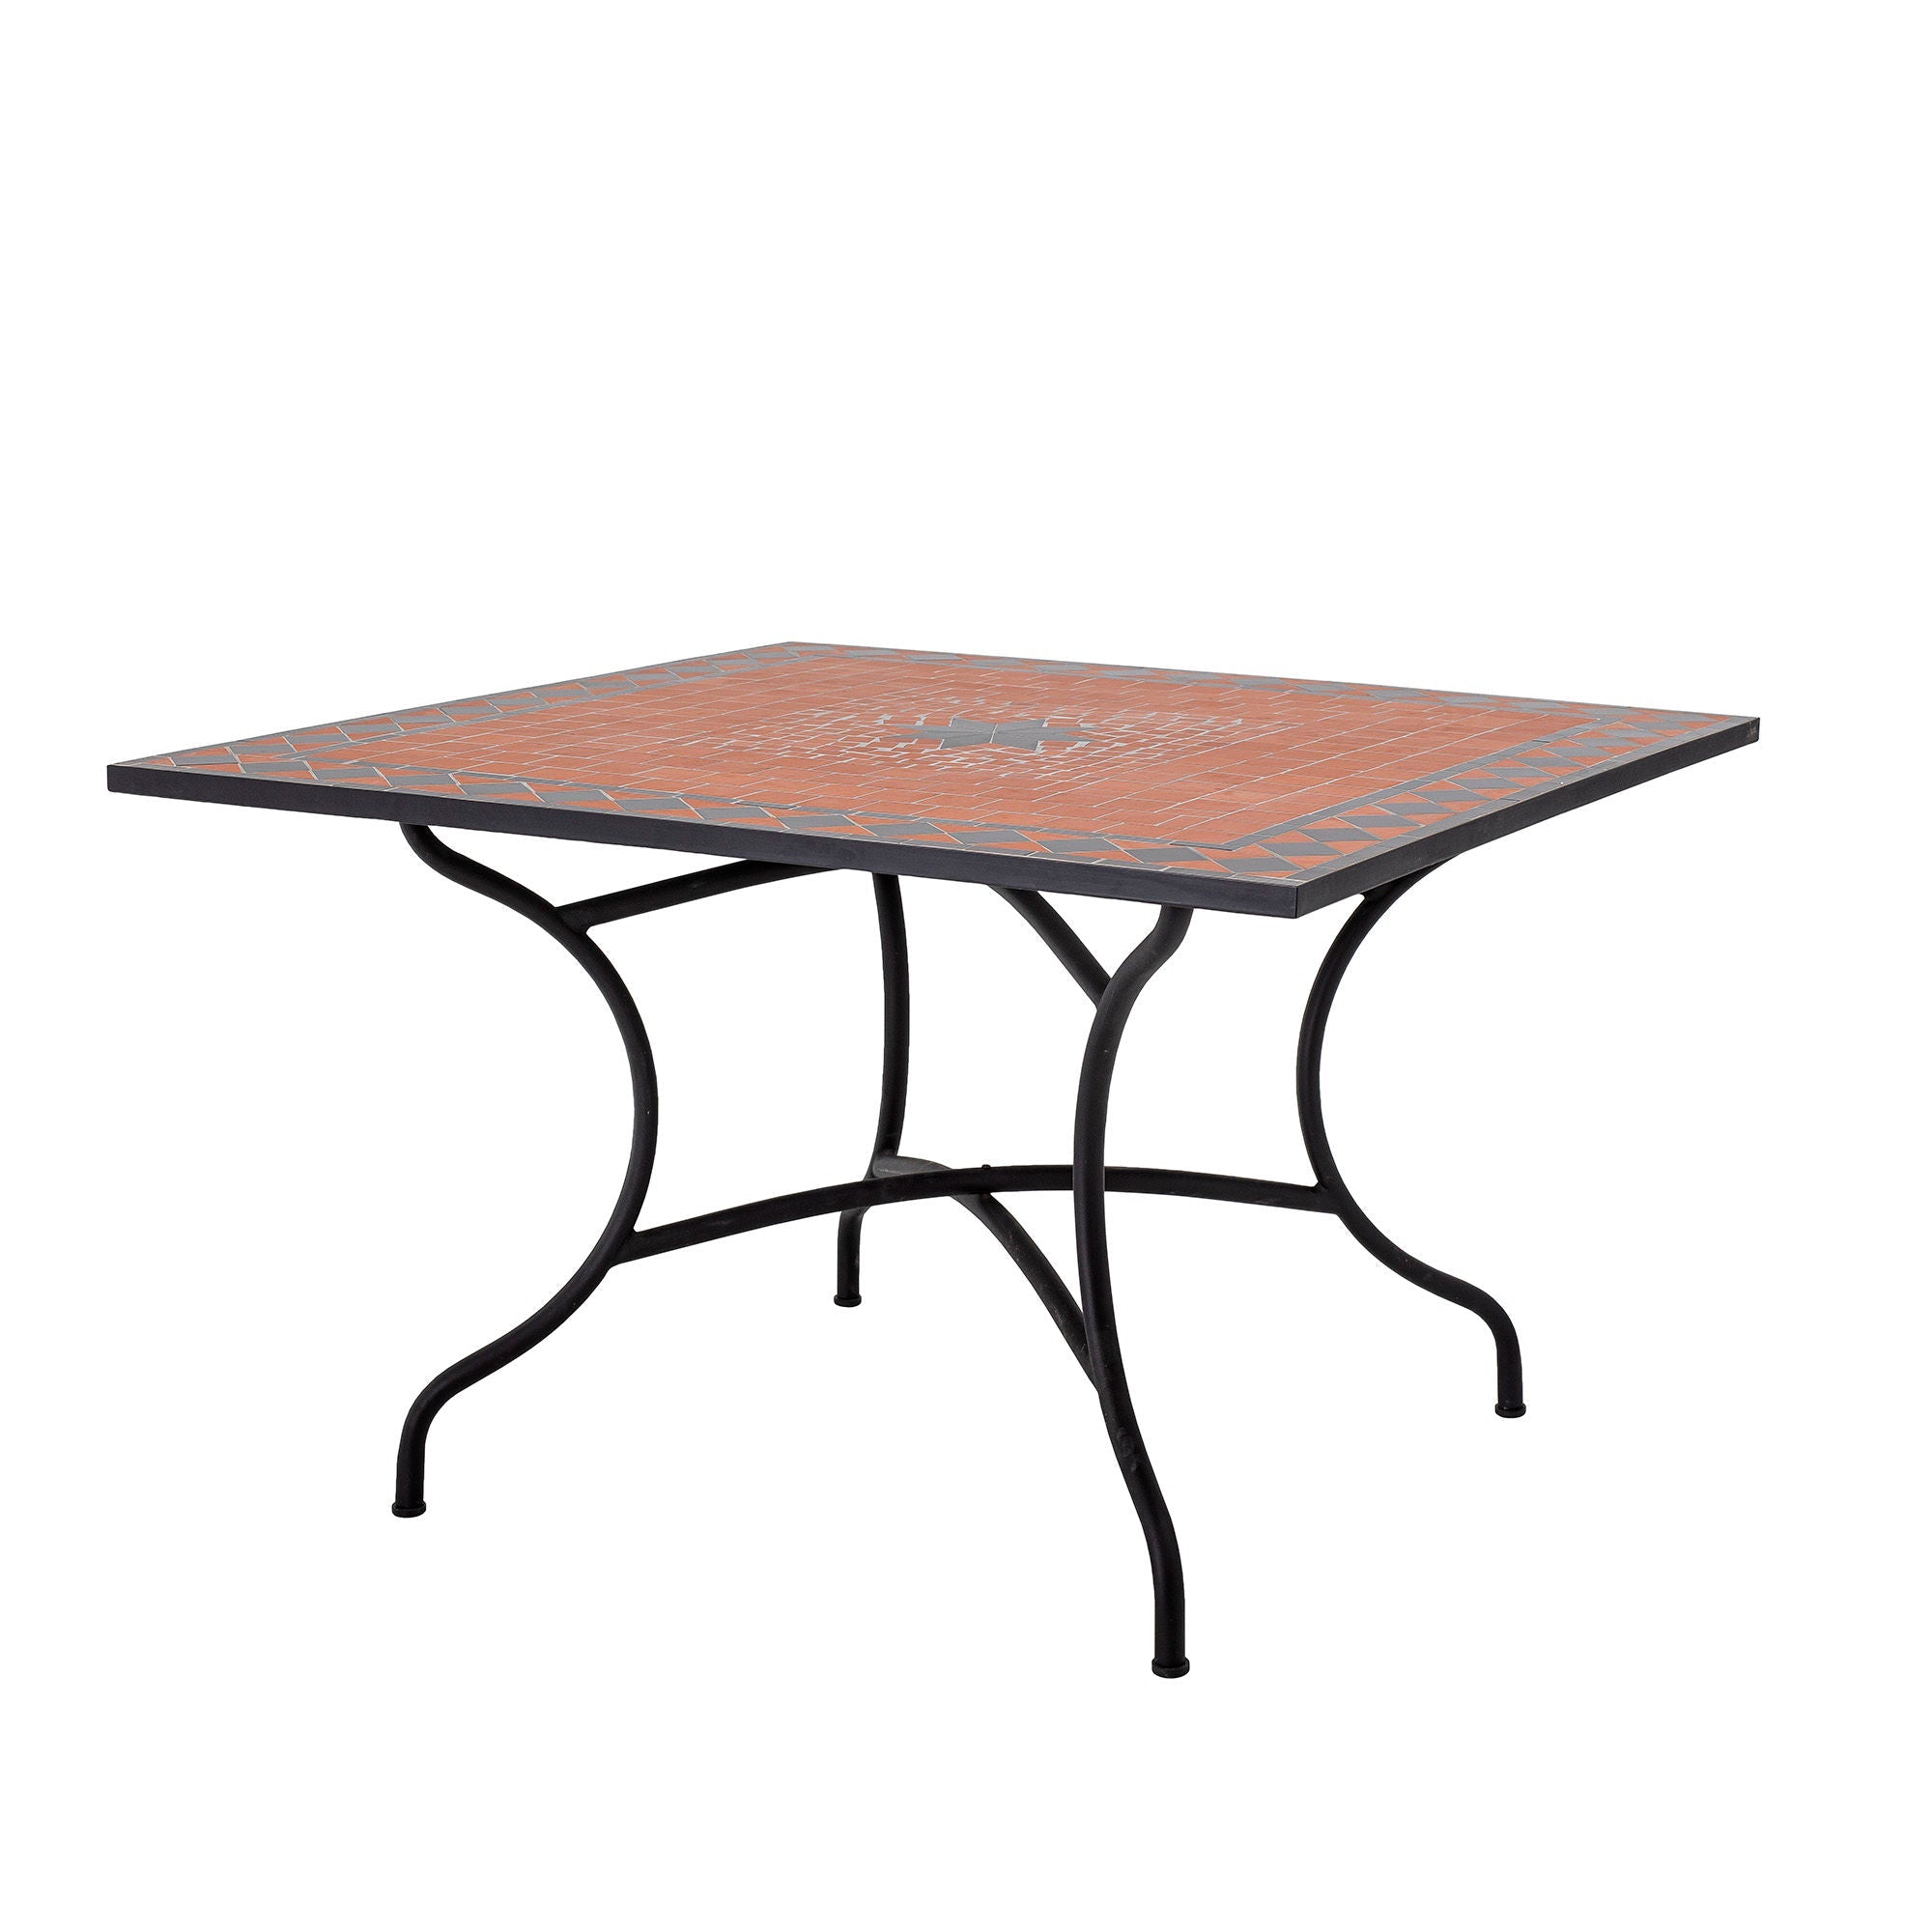 Creative Collection Hellen Dining Table, Red, Stone